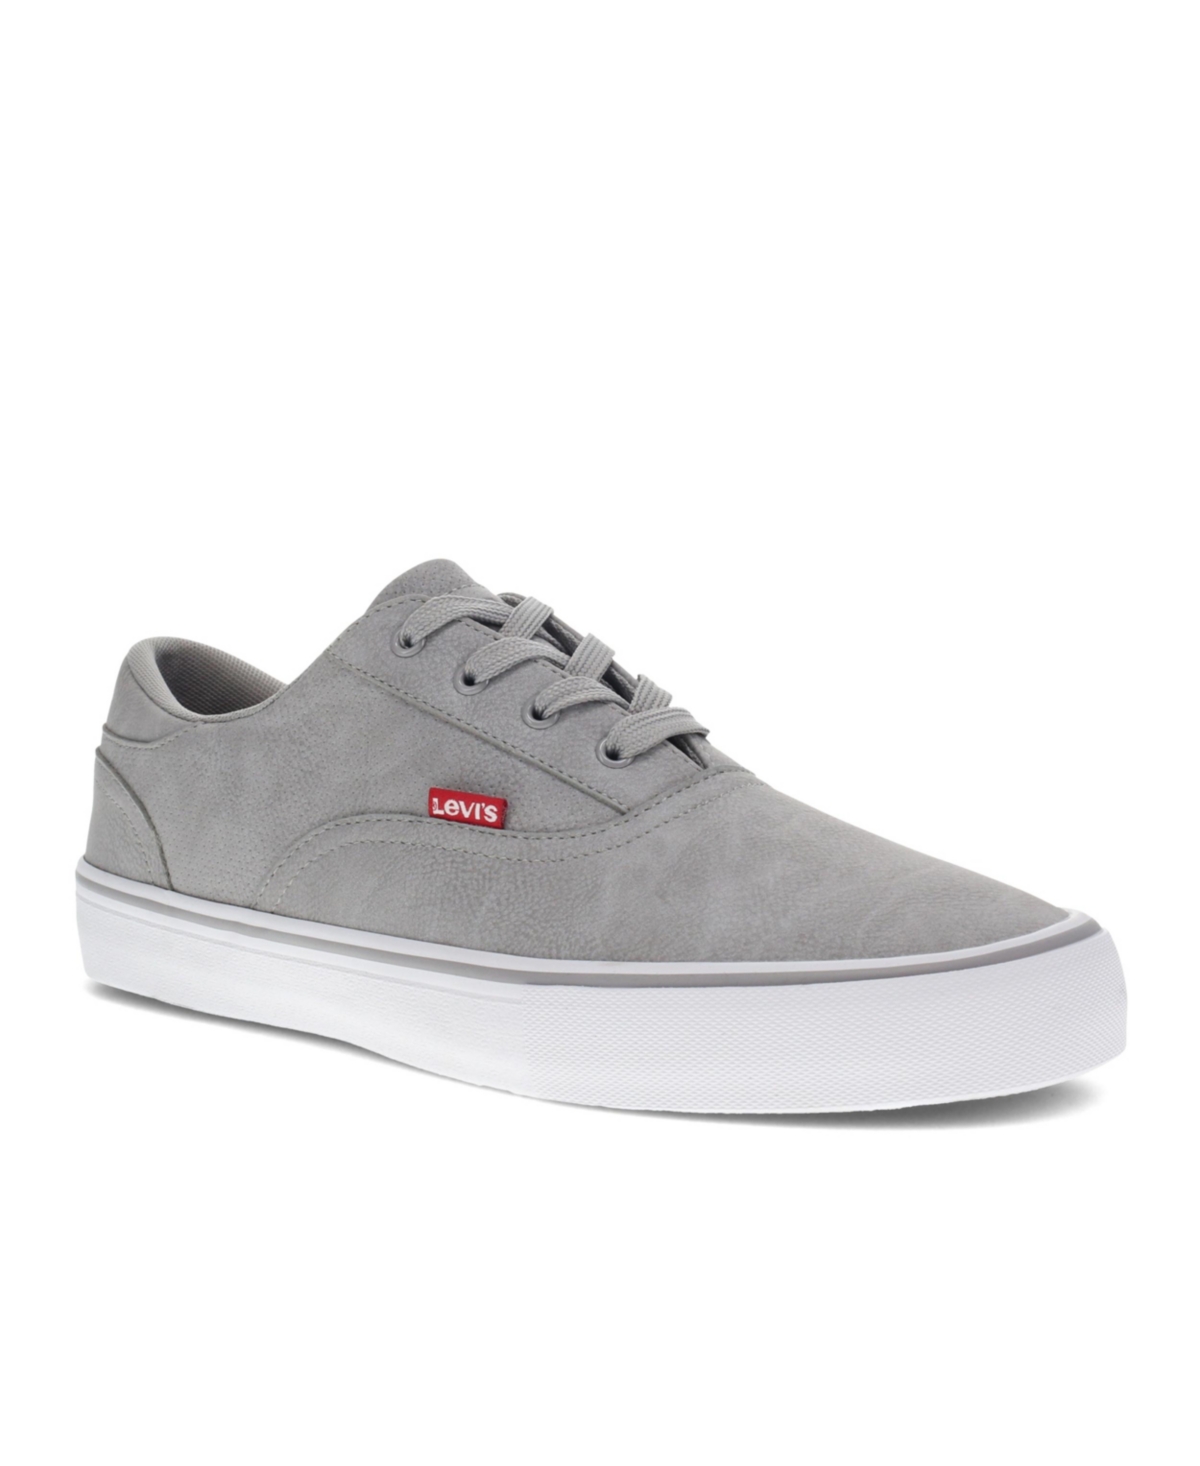 Levi's Men's Ethan S Wx Lace-up Sneakers Men's Shoes In Gray